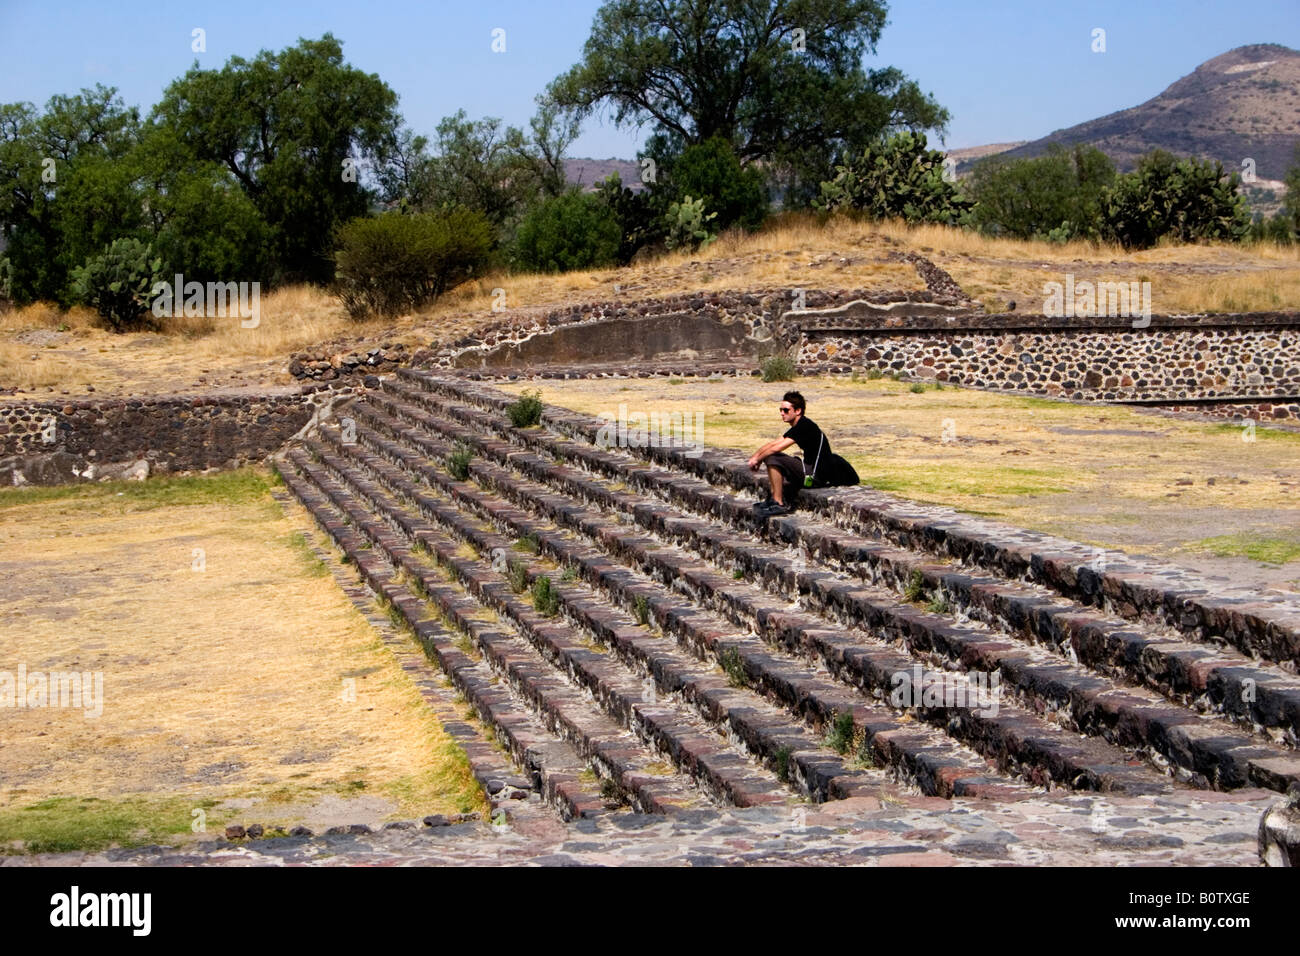 A tourist at Teotihuacan, the largest pre-Columbian city in the Americas, Mexico and Mesoamerica's largst ruin site. Stock Photo